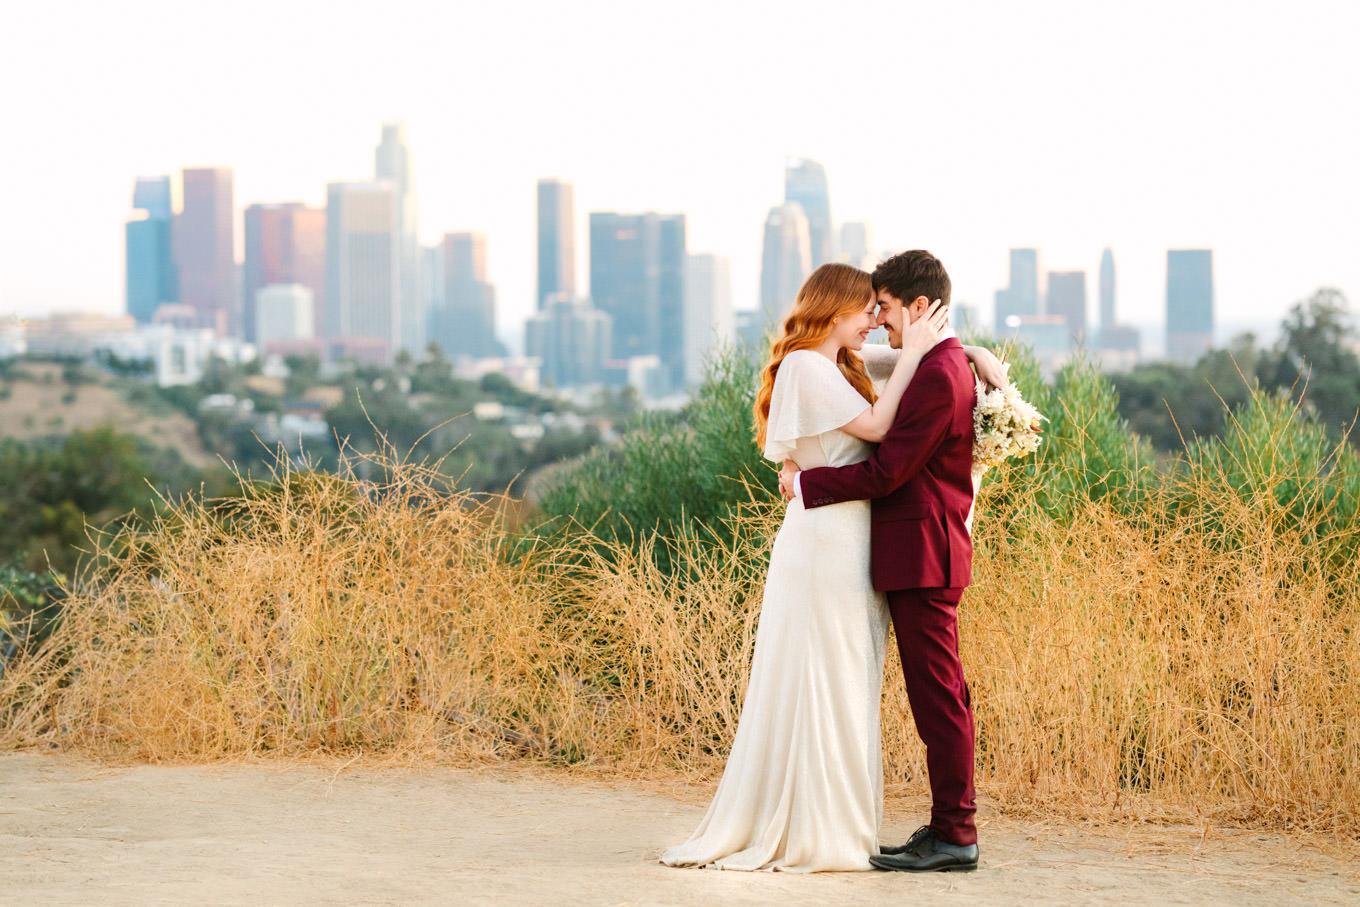 Los Angeles skyline elopement | Engagement, elopement, and wedding photography roundup of Mary Costa’s favorite images from 2020 | Colorful and elevated photography for fun-loving couples in Southern California | #2020wedding #elopement #weddingphoto #weddingphotography #microwedding   Source: Mary Costa Photography | Los Angeles